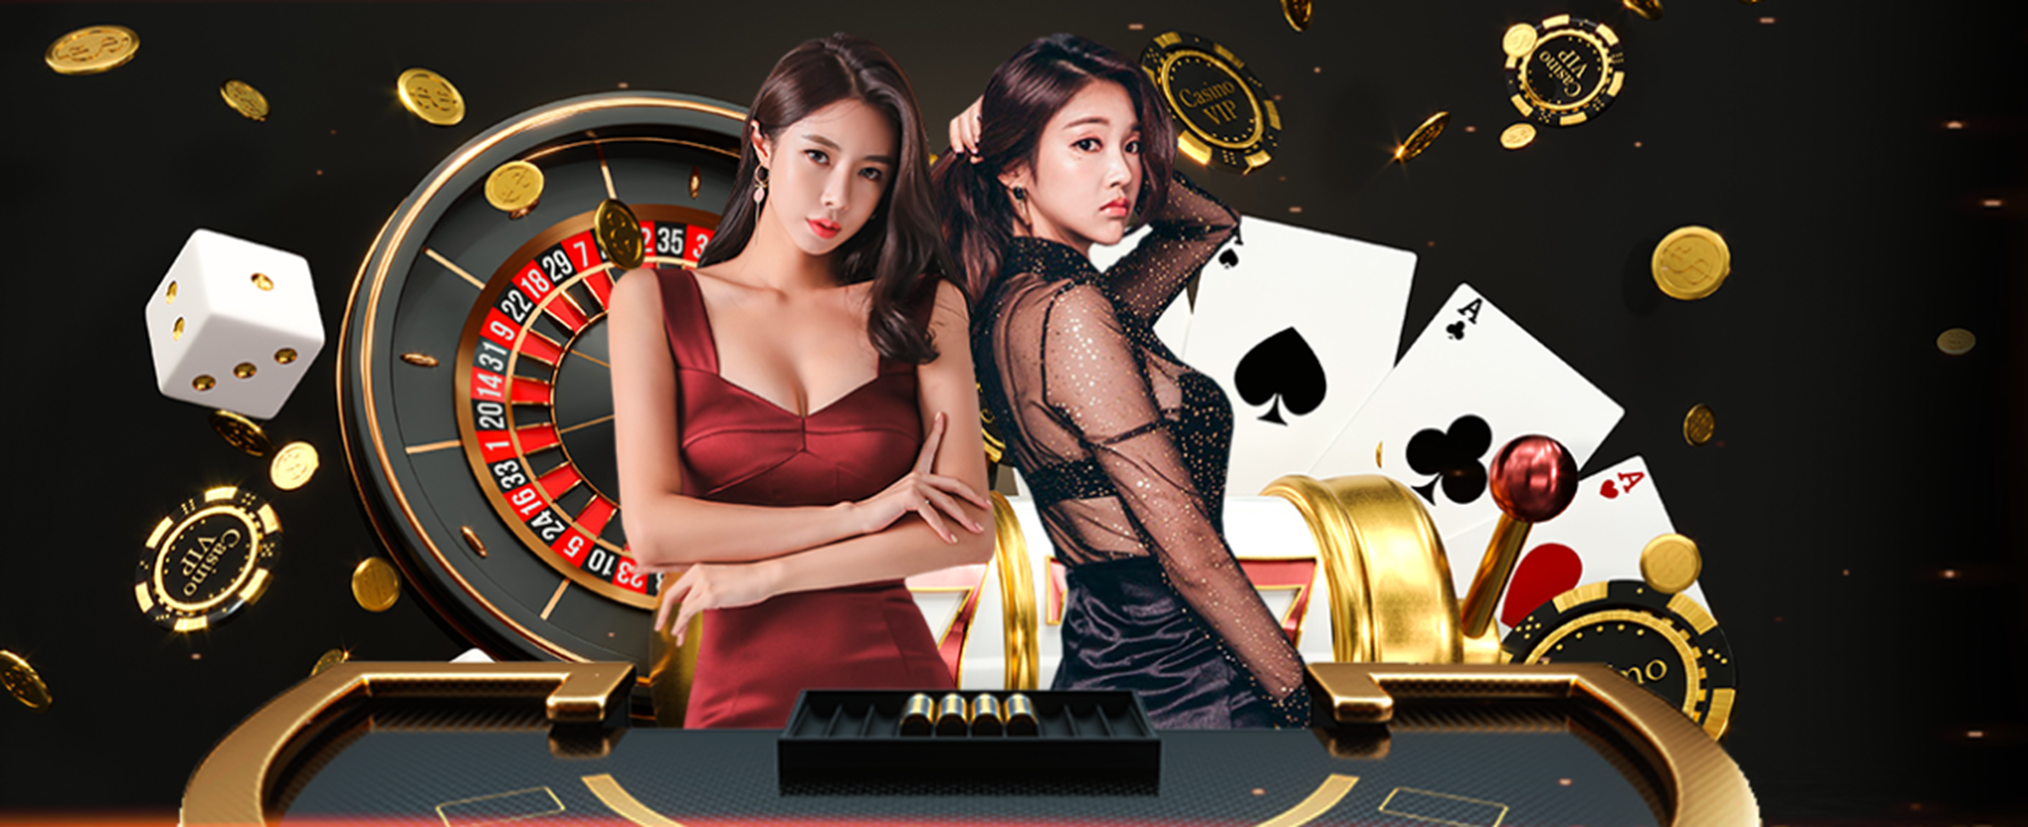 How to choose the right live casino in Singapore for your gaming needs